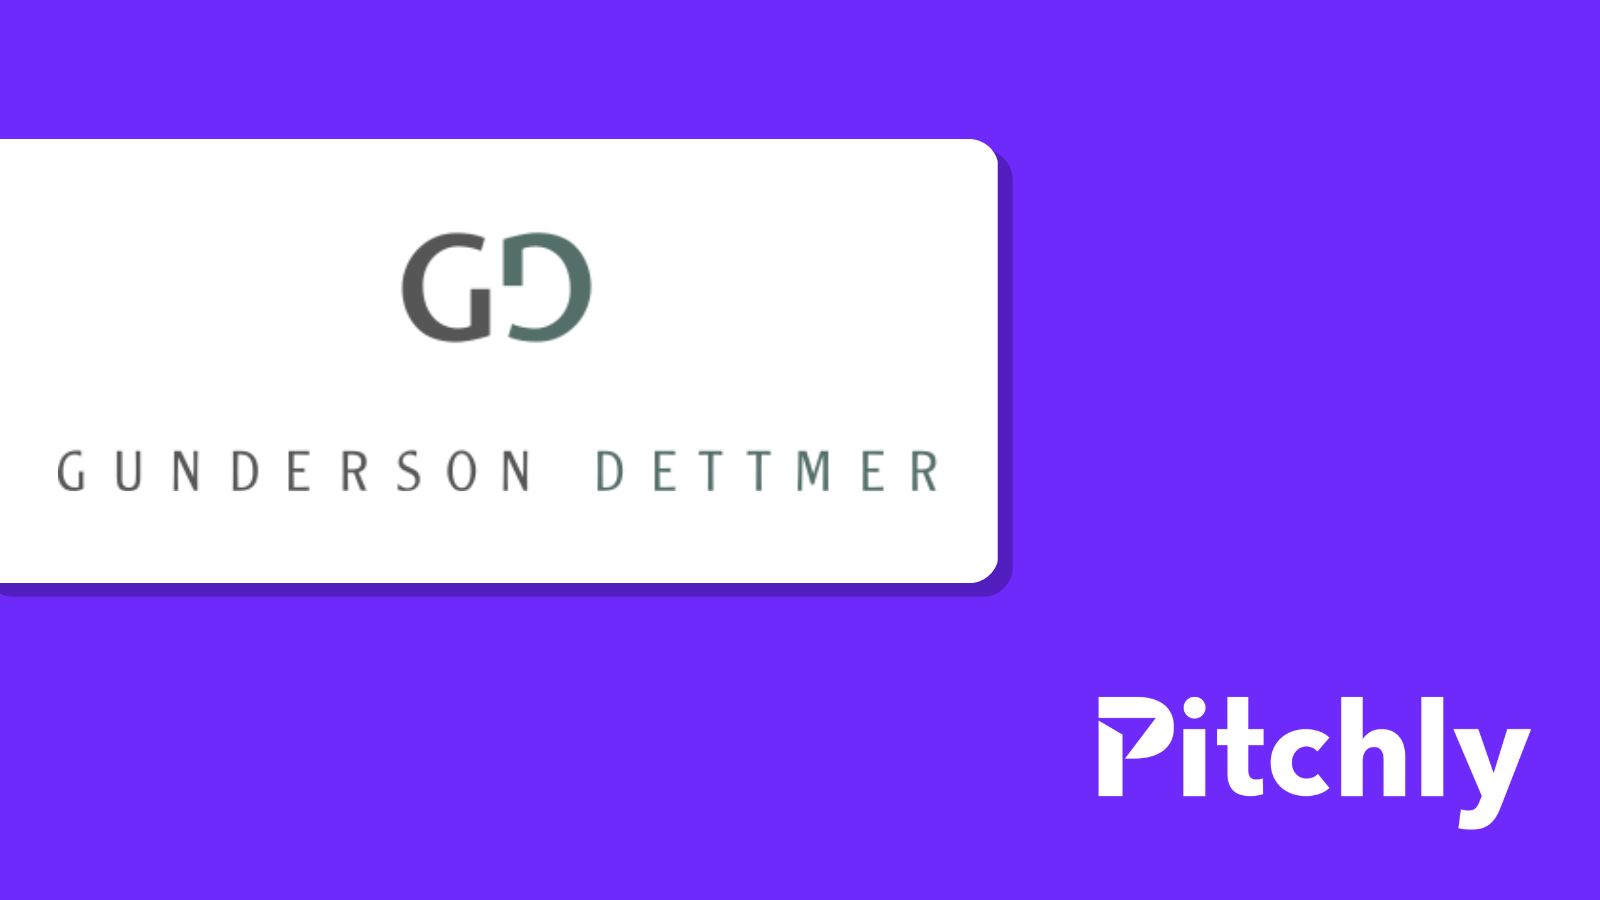 Gunderson Dettmer Pitchly client story